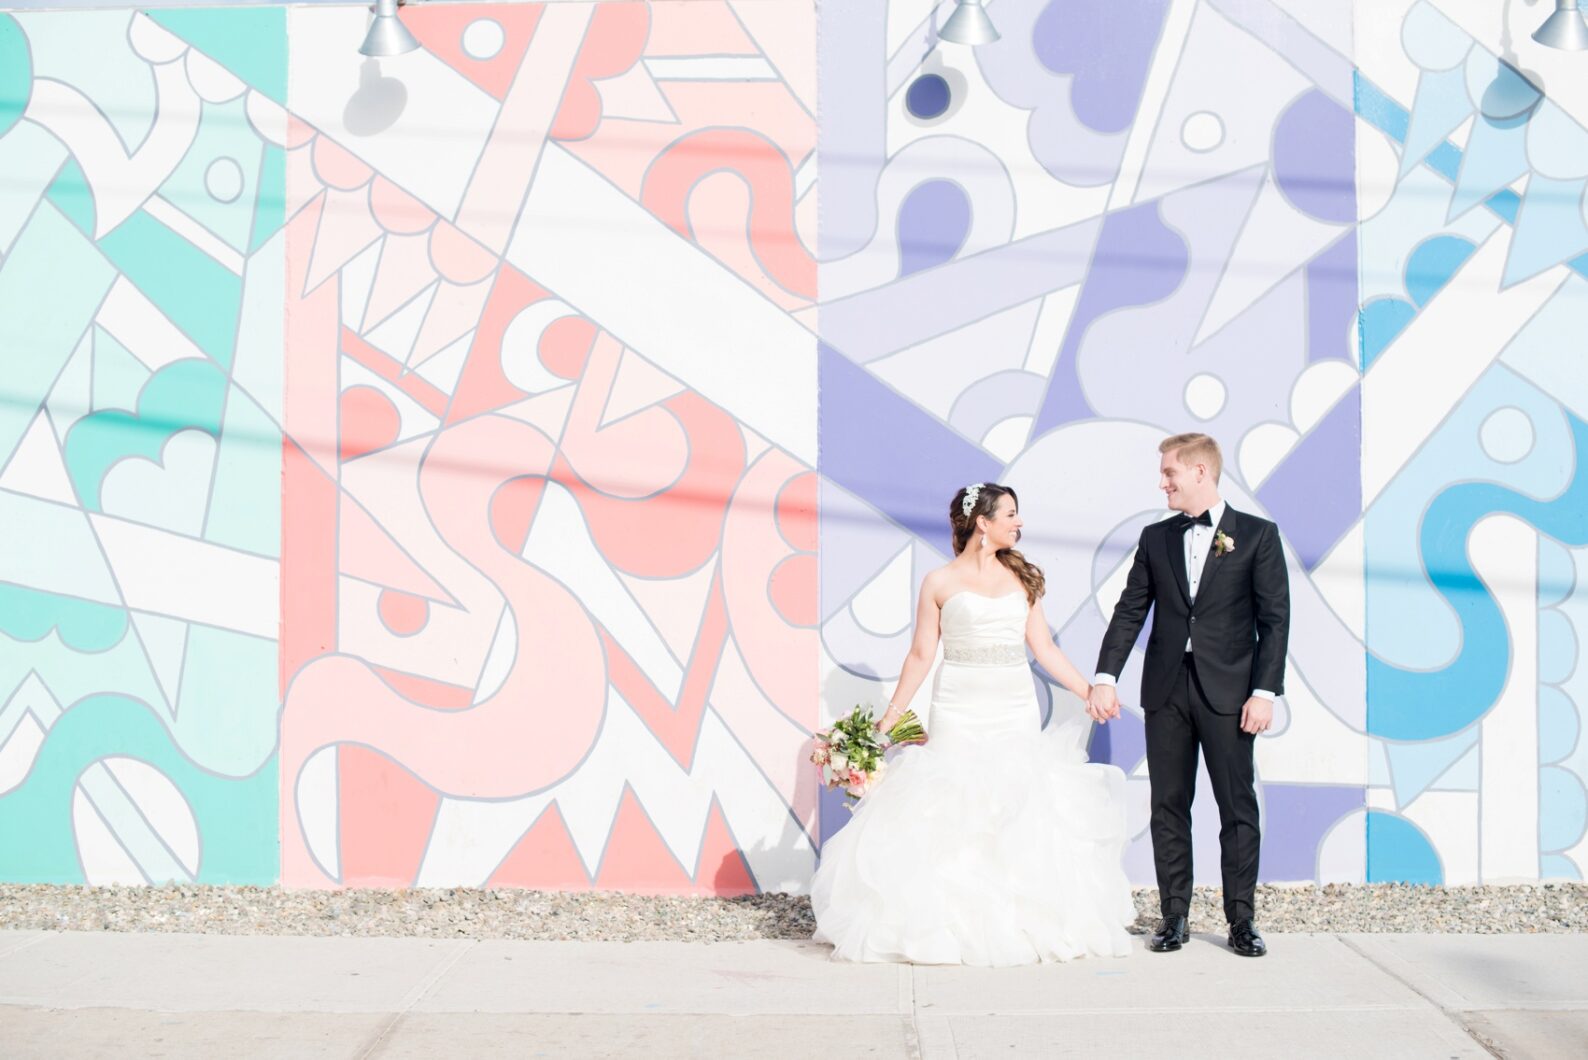 Coney Island colorful mural graffiti wedding photos by Mikkel Paige Photography, NYC wedding photographer. Planning by Dulce Dreams Events, flowers by Sachi Rose.